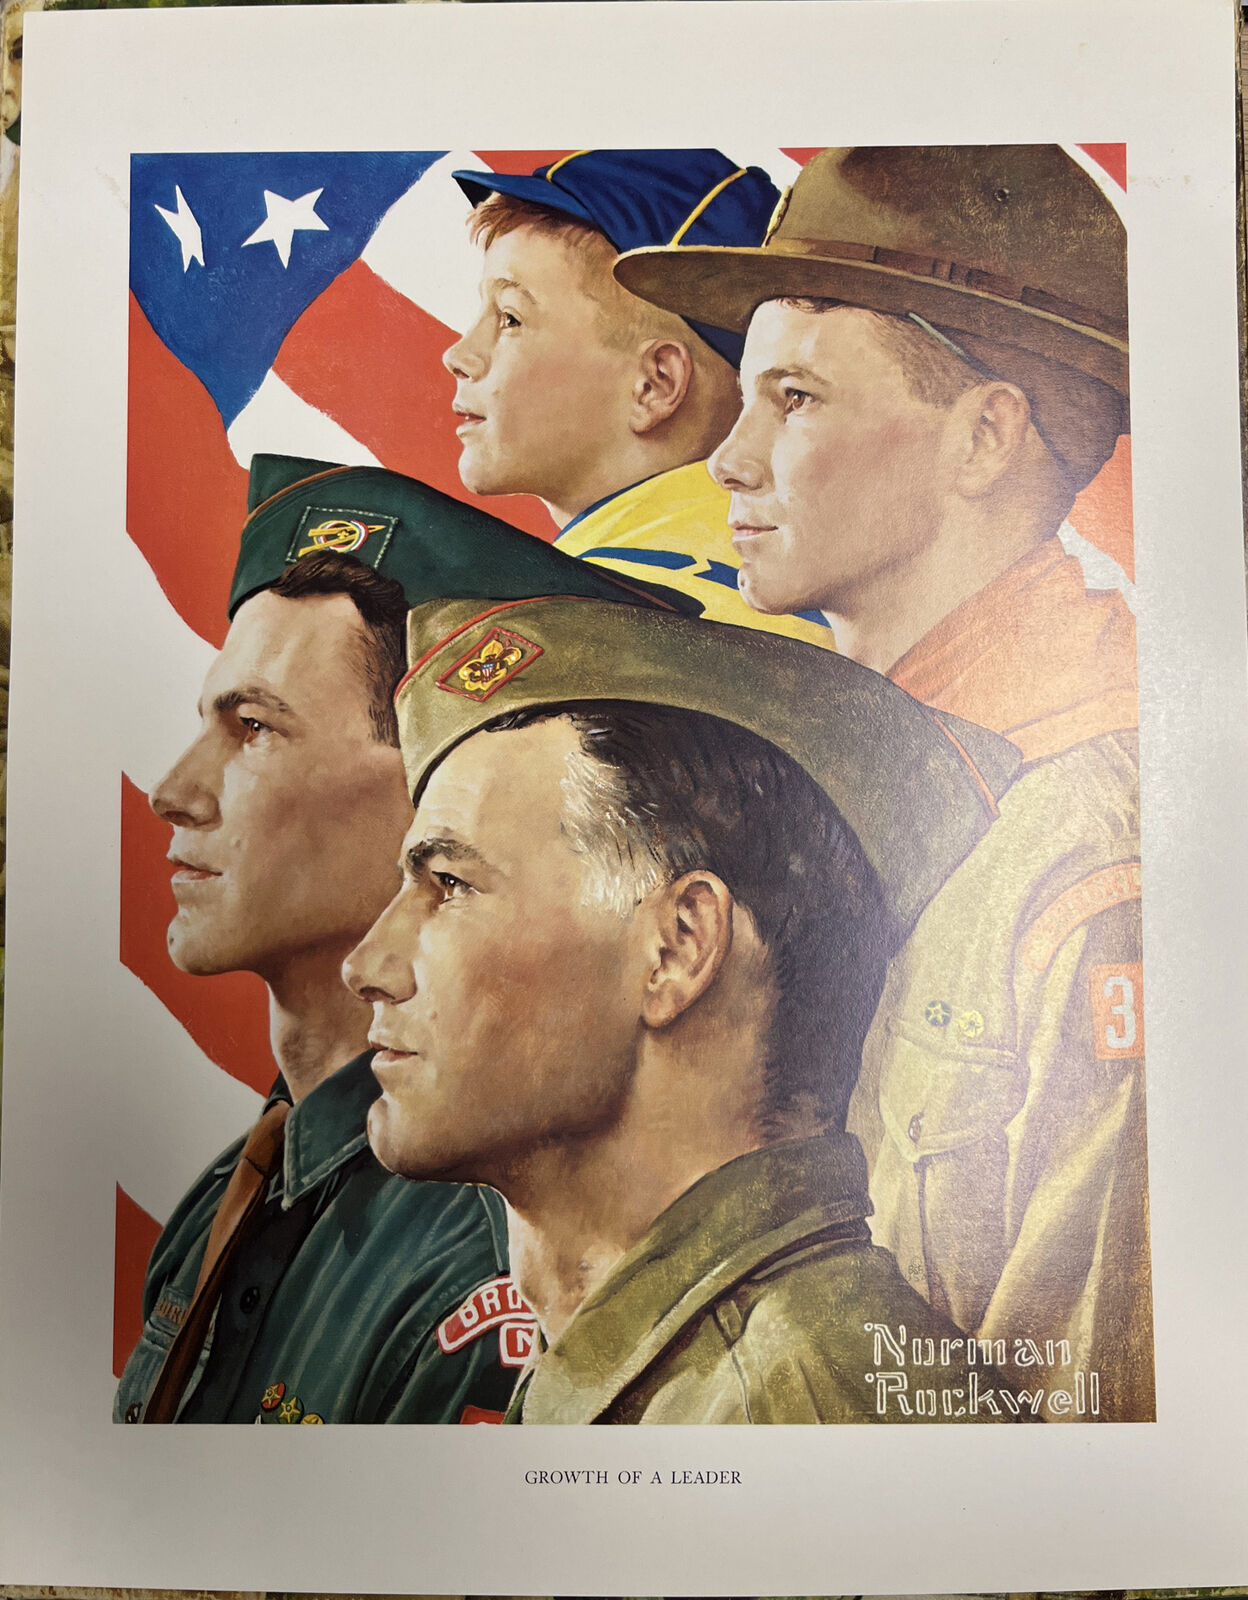 SCOUTING THROUGH THE EYES OF NORMAN ROCKWELL - Growth Of A Leader